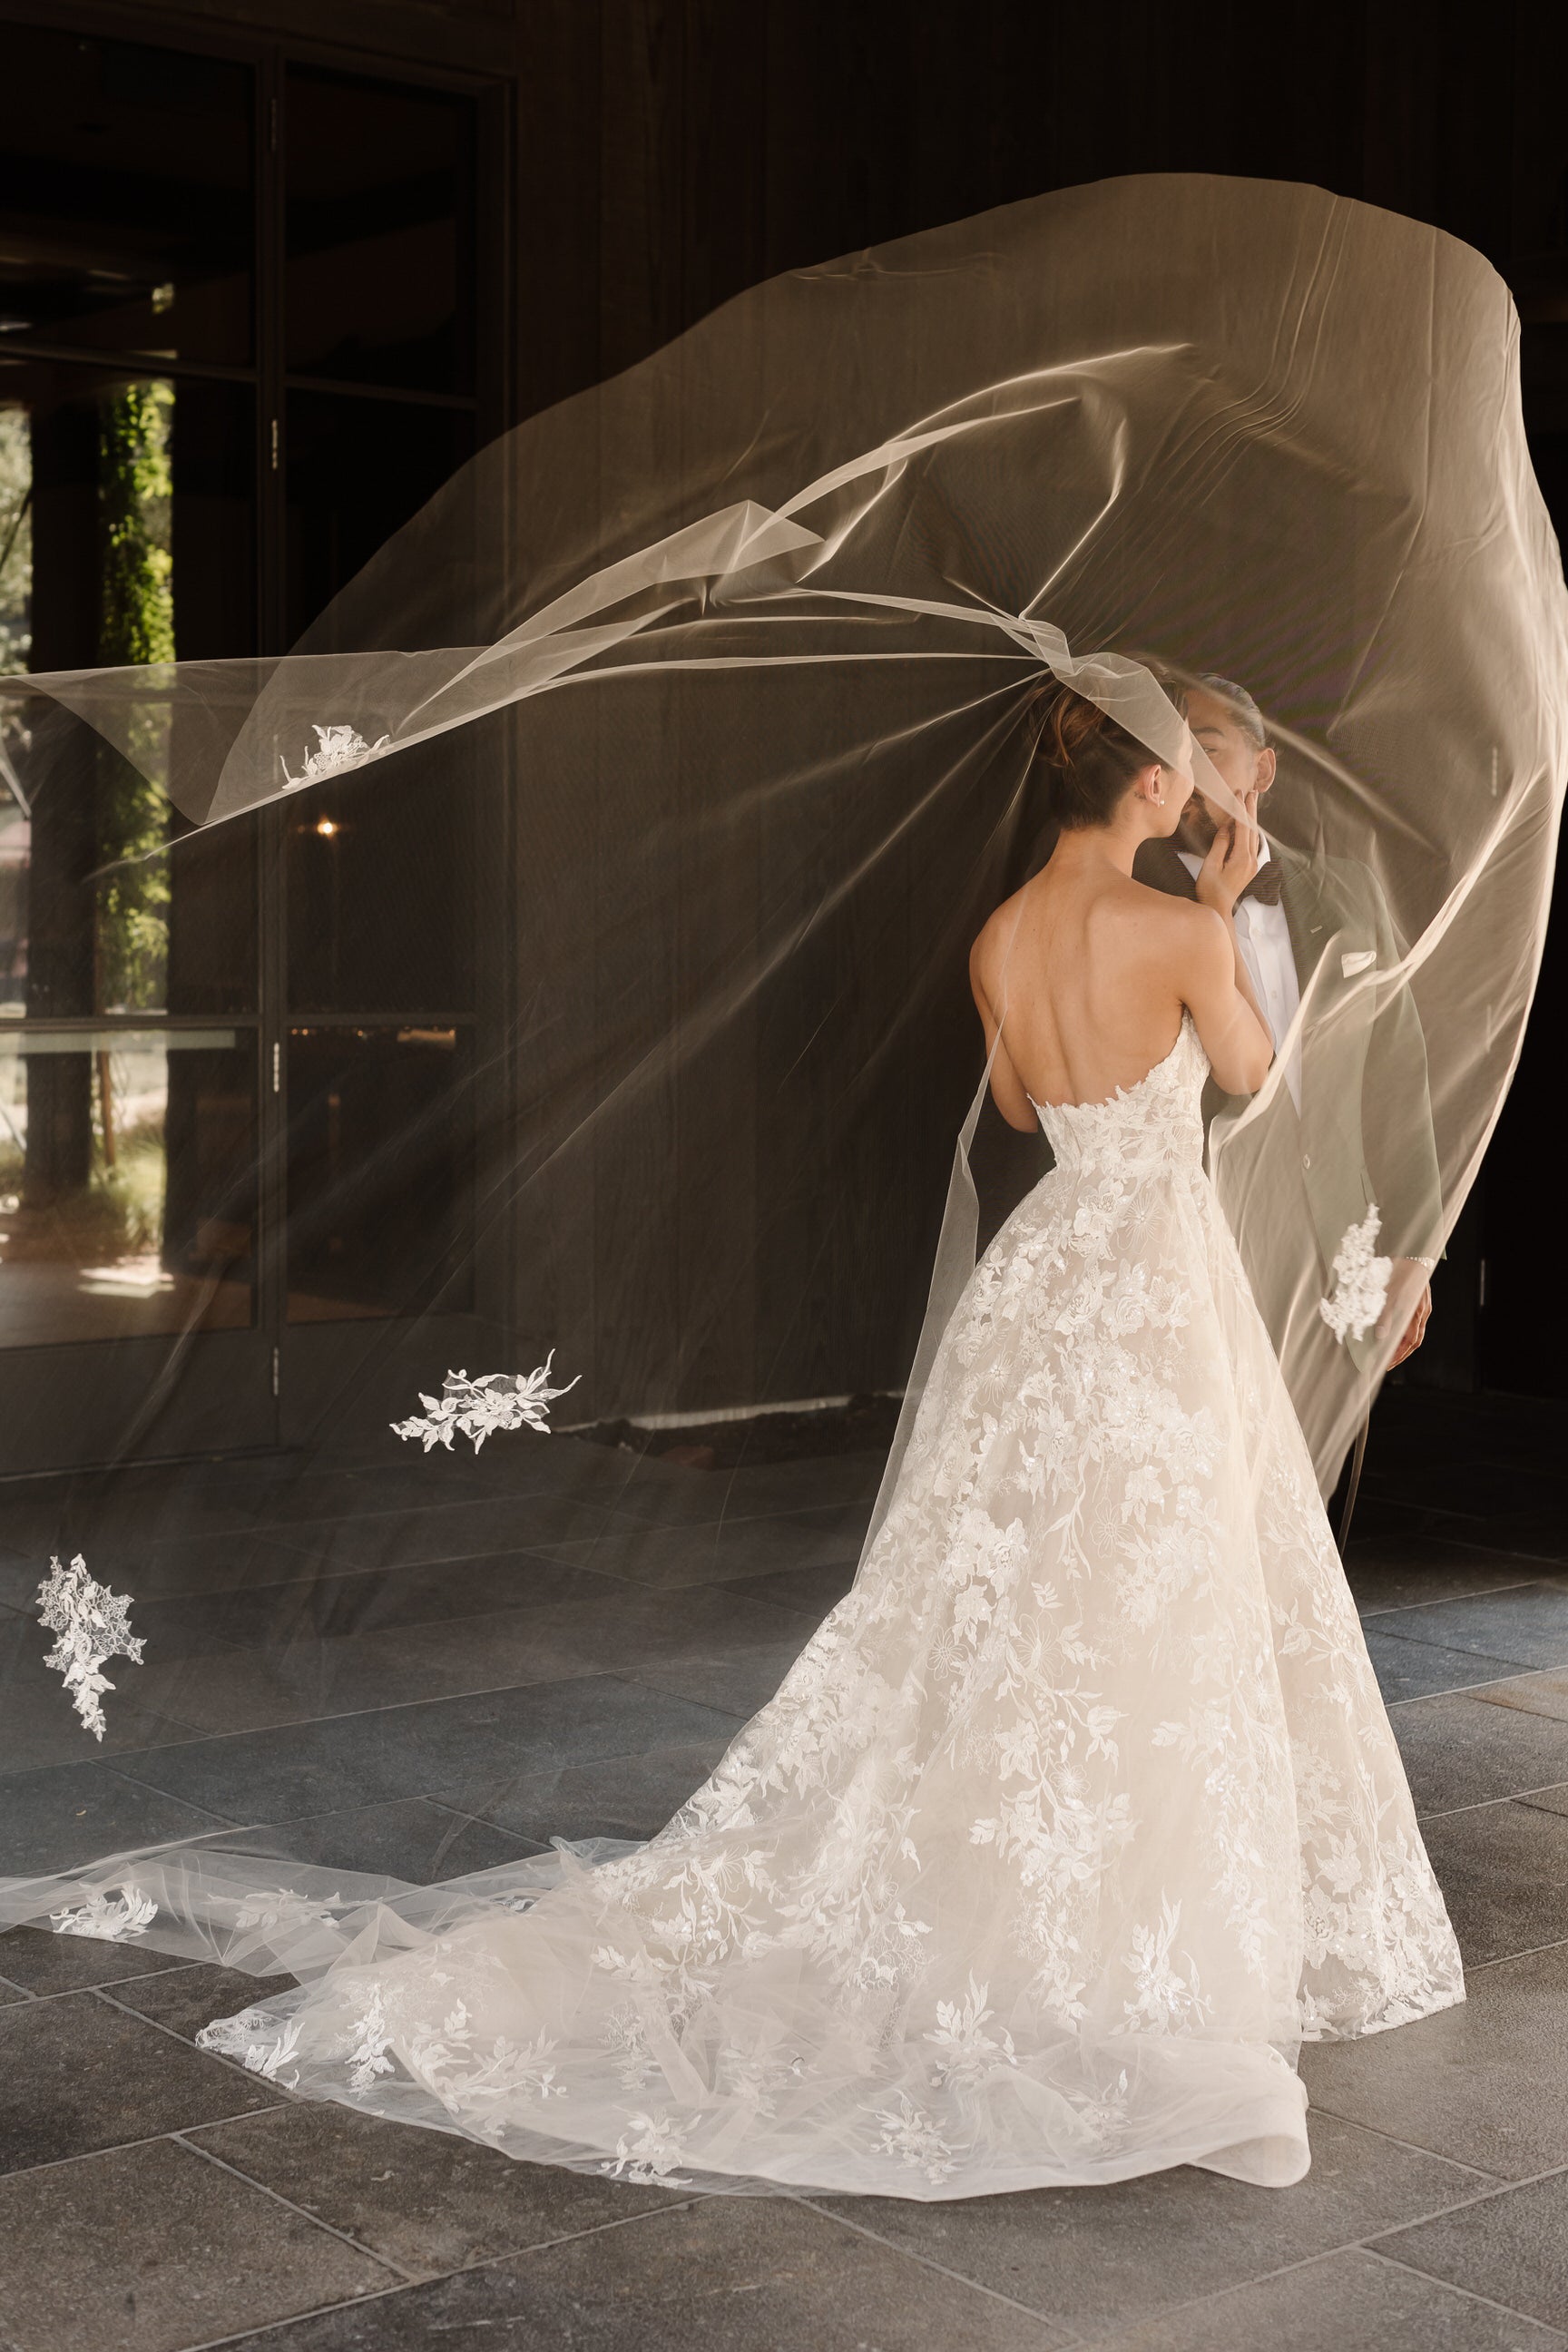 Wedding Bridal Veil Cathedral Length Veils with Appliques Wedding